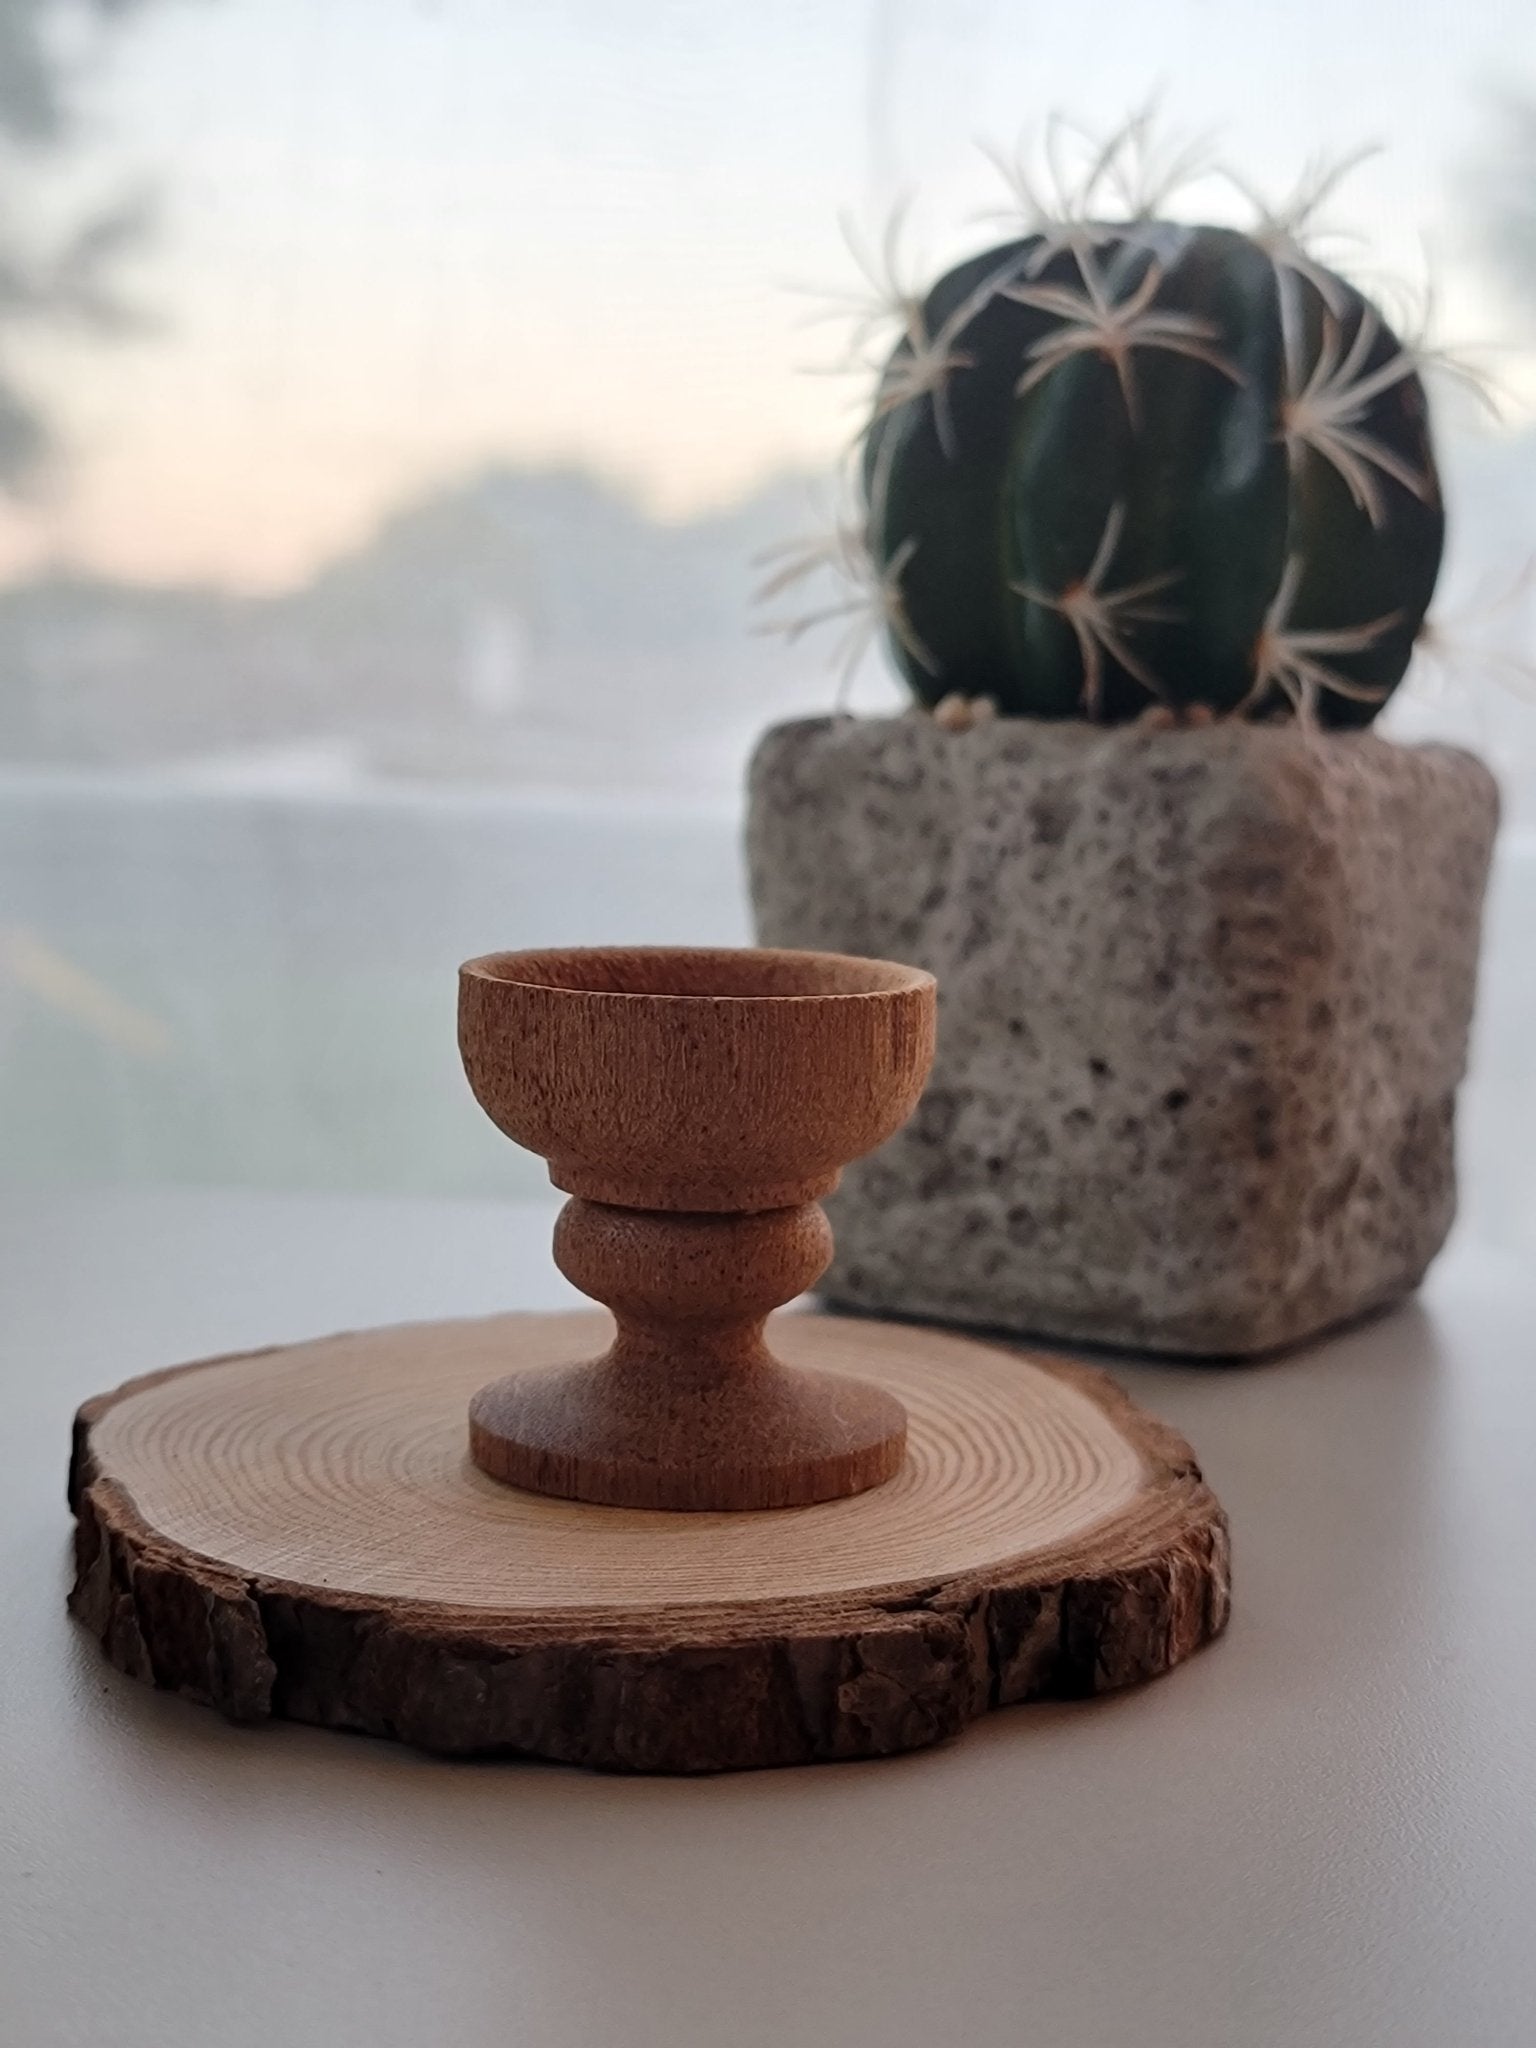 Tiny Wooden Cup - Smash's Stashes